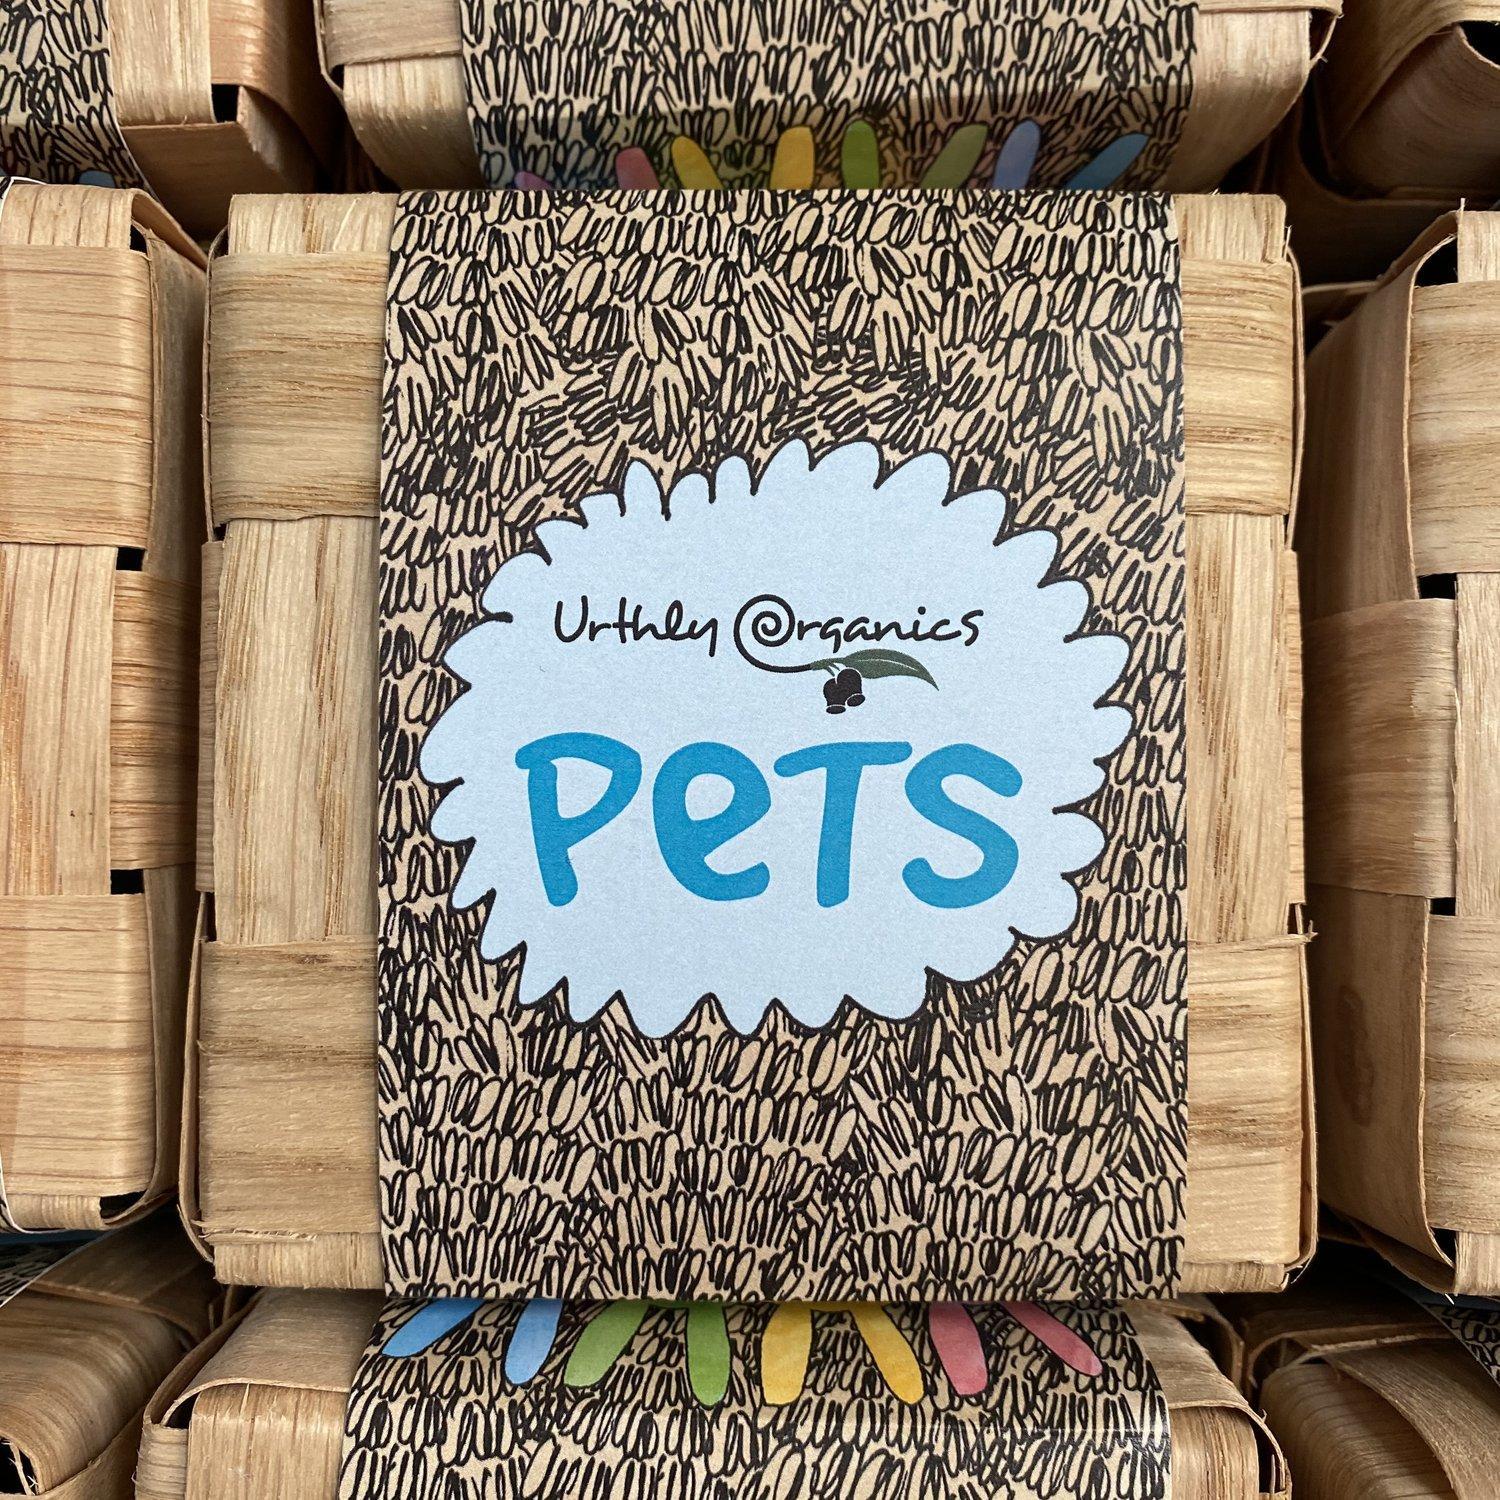 Pets (Rabbits) Soap Limited Release - Here and There Makers